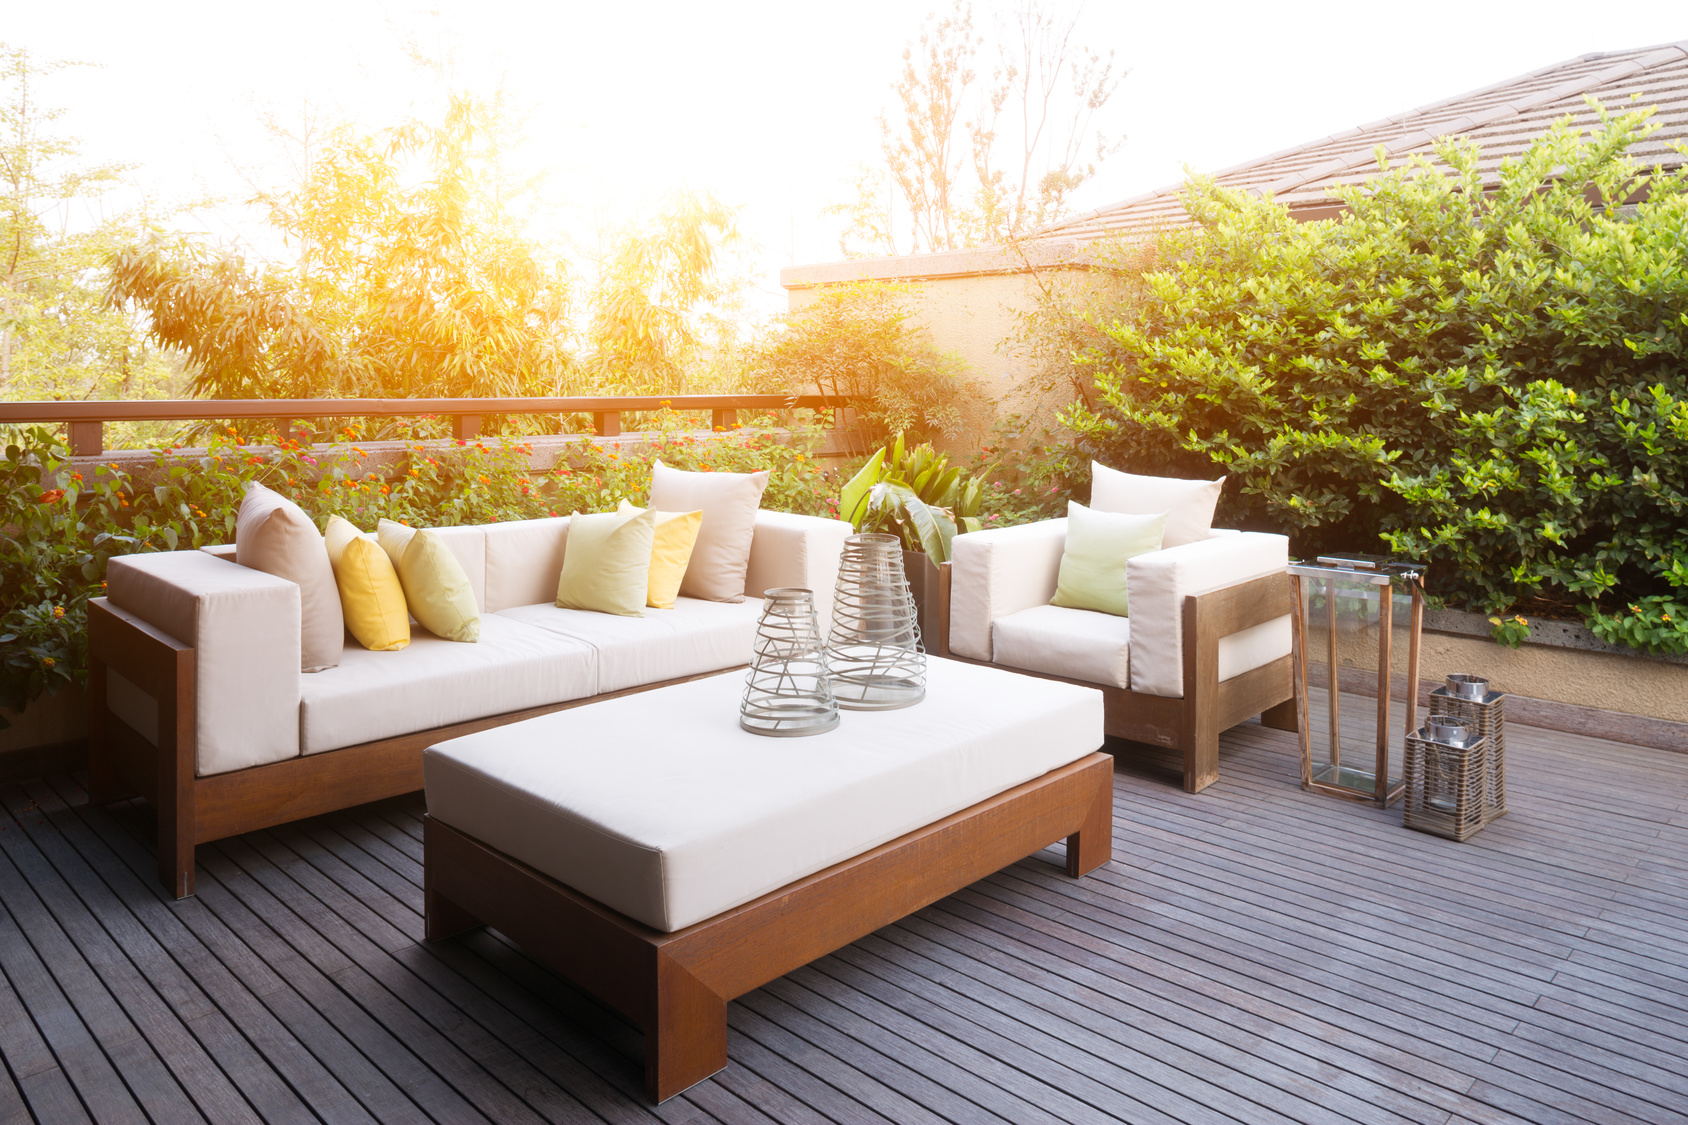 Questions to Ask When Designing an Outdoor Living Space